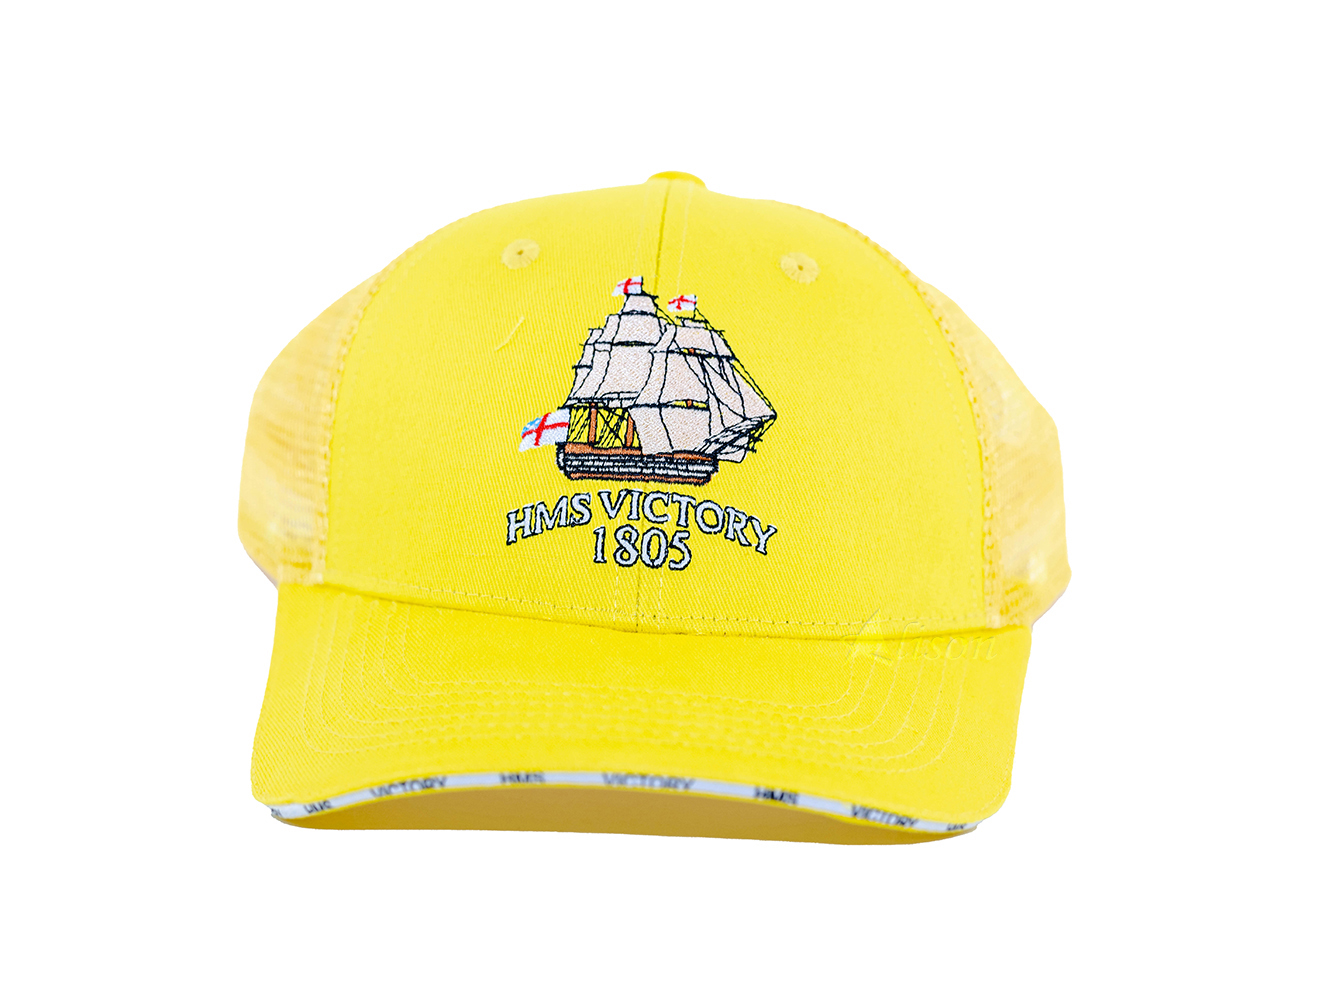 FA001 HMS Victory Embroidered Cap in Yellow by Alison FA001L01.jpg